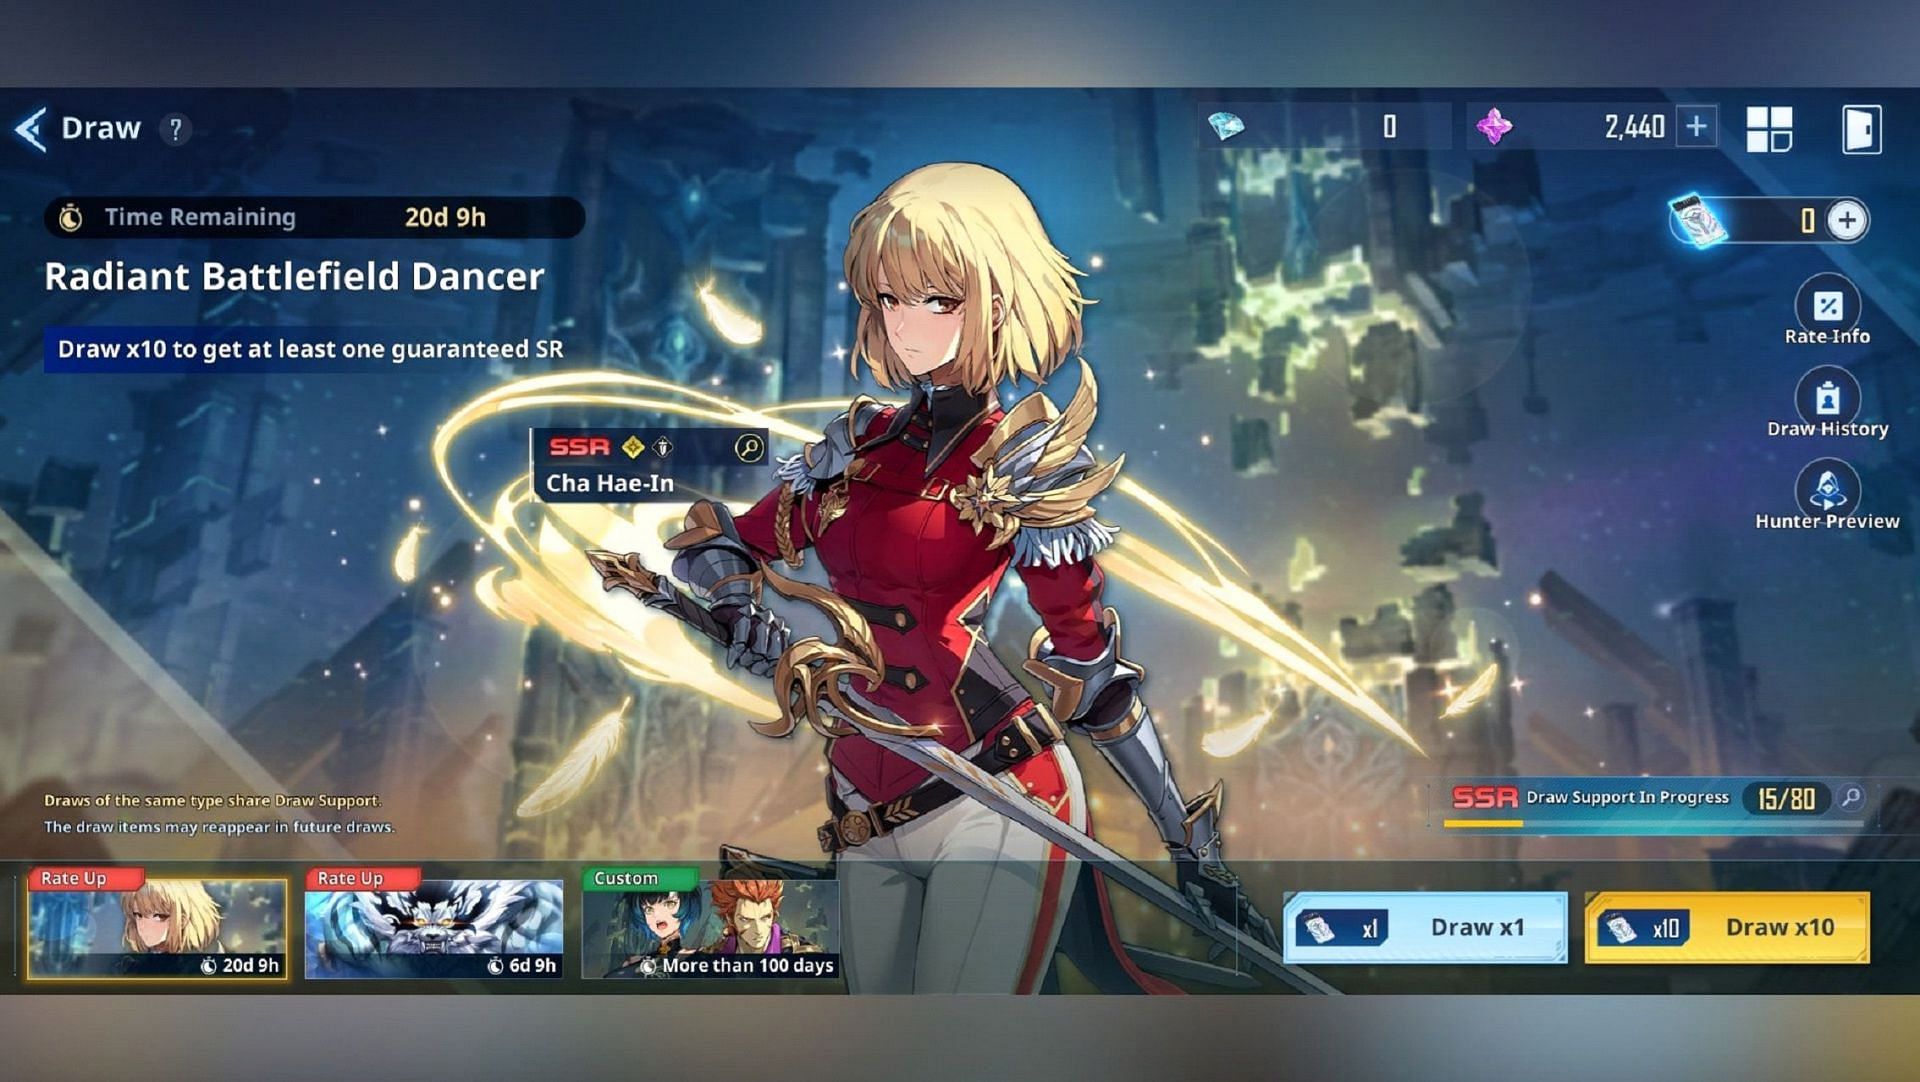 An in-game screenshot of the Rate-Up Draw banner, Radiant Battlefield Dancer, featuring Cha Hae-In. (Image via Netmarble)